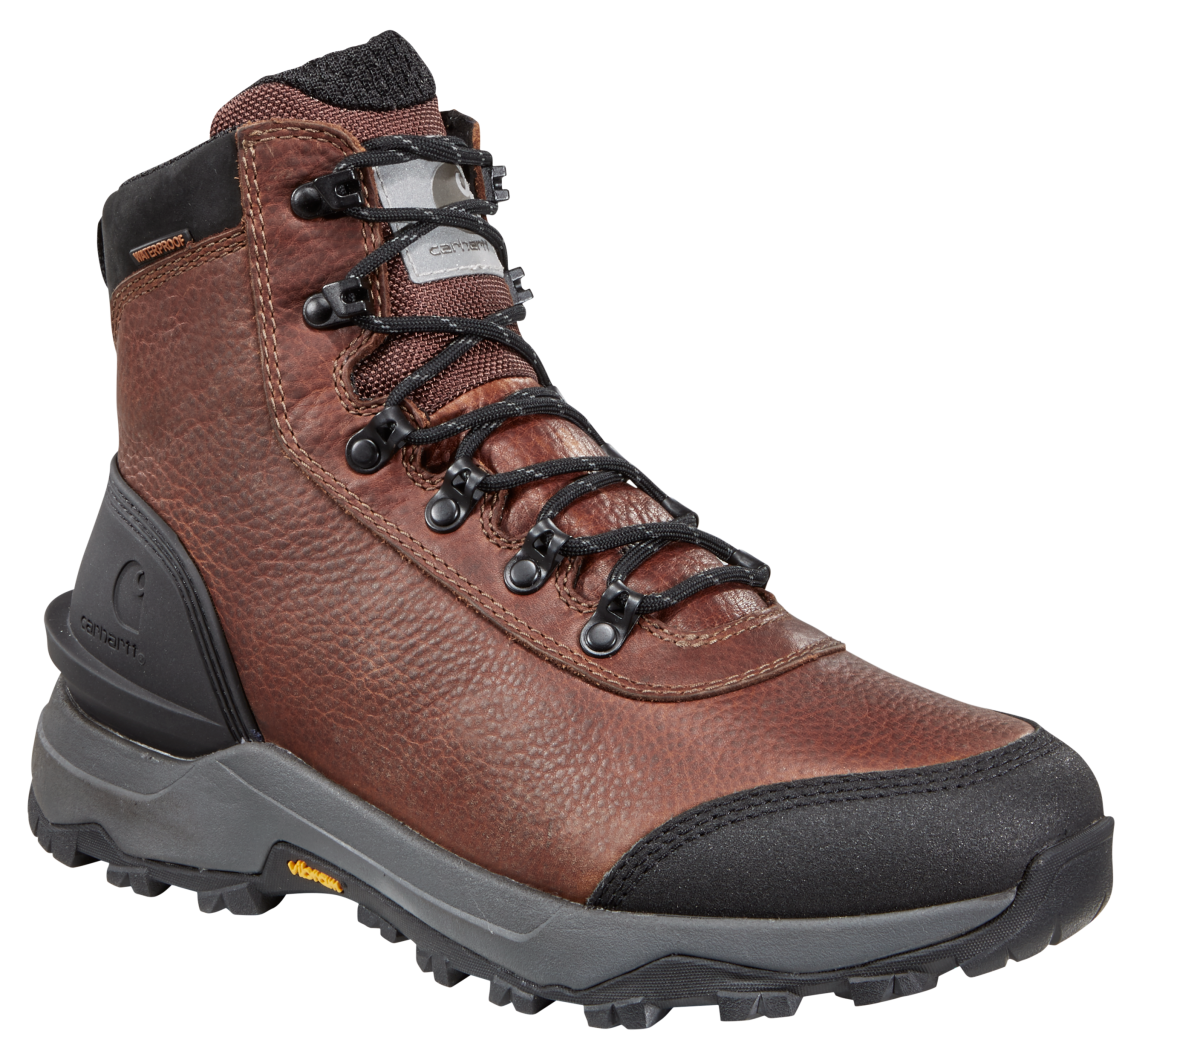 Carhartt Outdoor Hiker Insulated Waterproof Hiking Boots for Men - Mineral Red - 10.5M